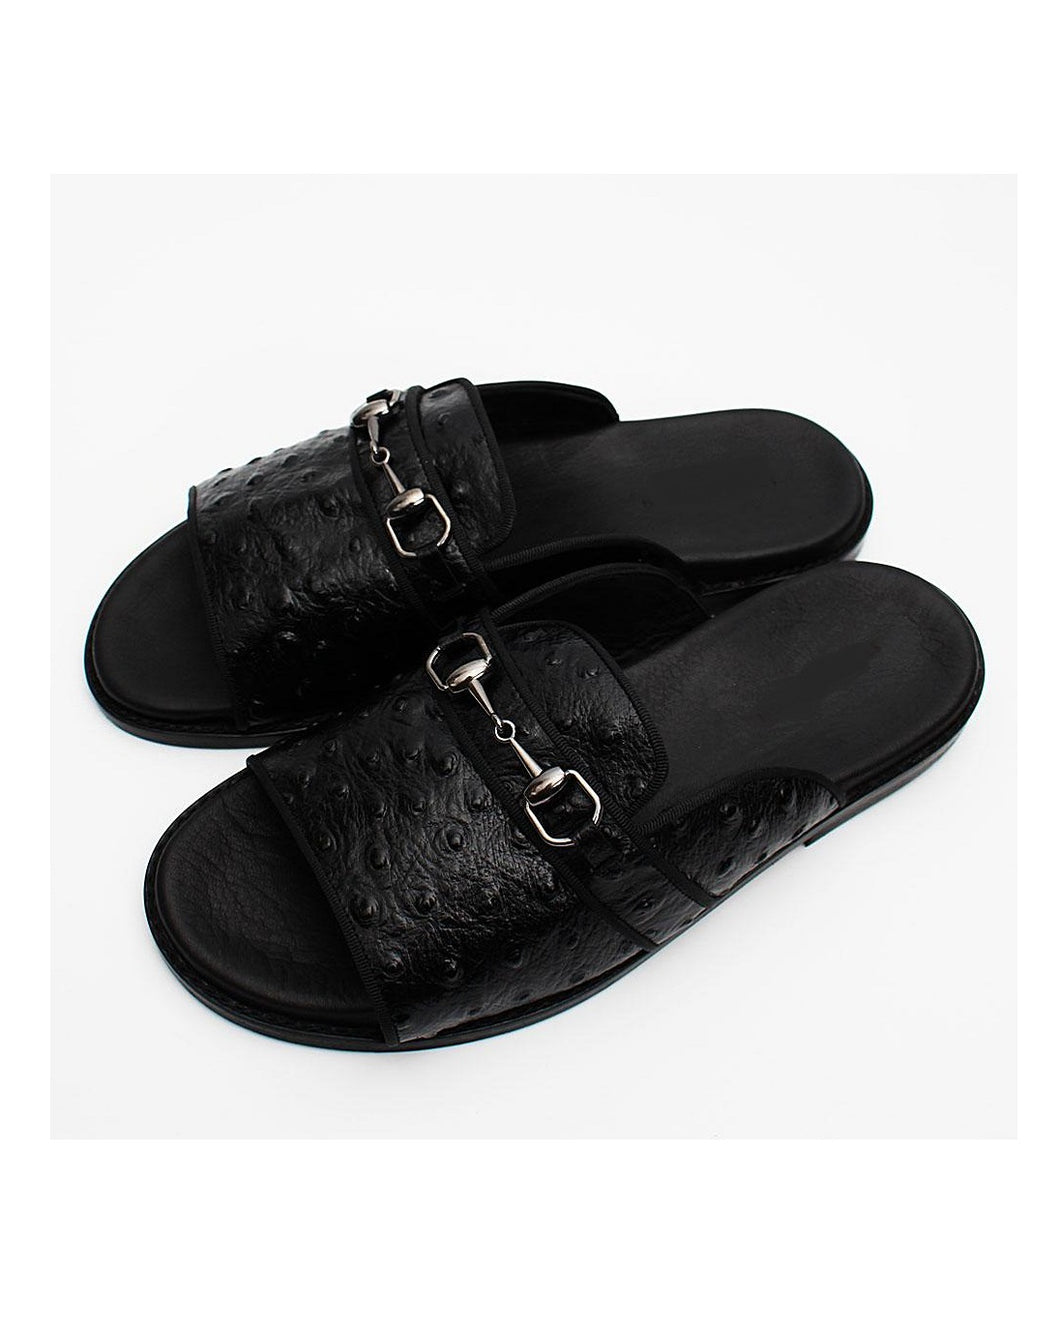 Detailed Ostrich Skin Leather Slippers